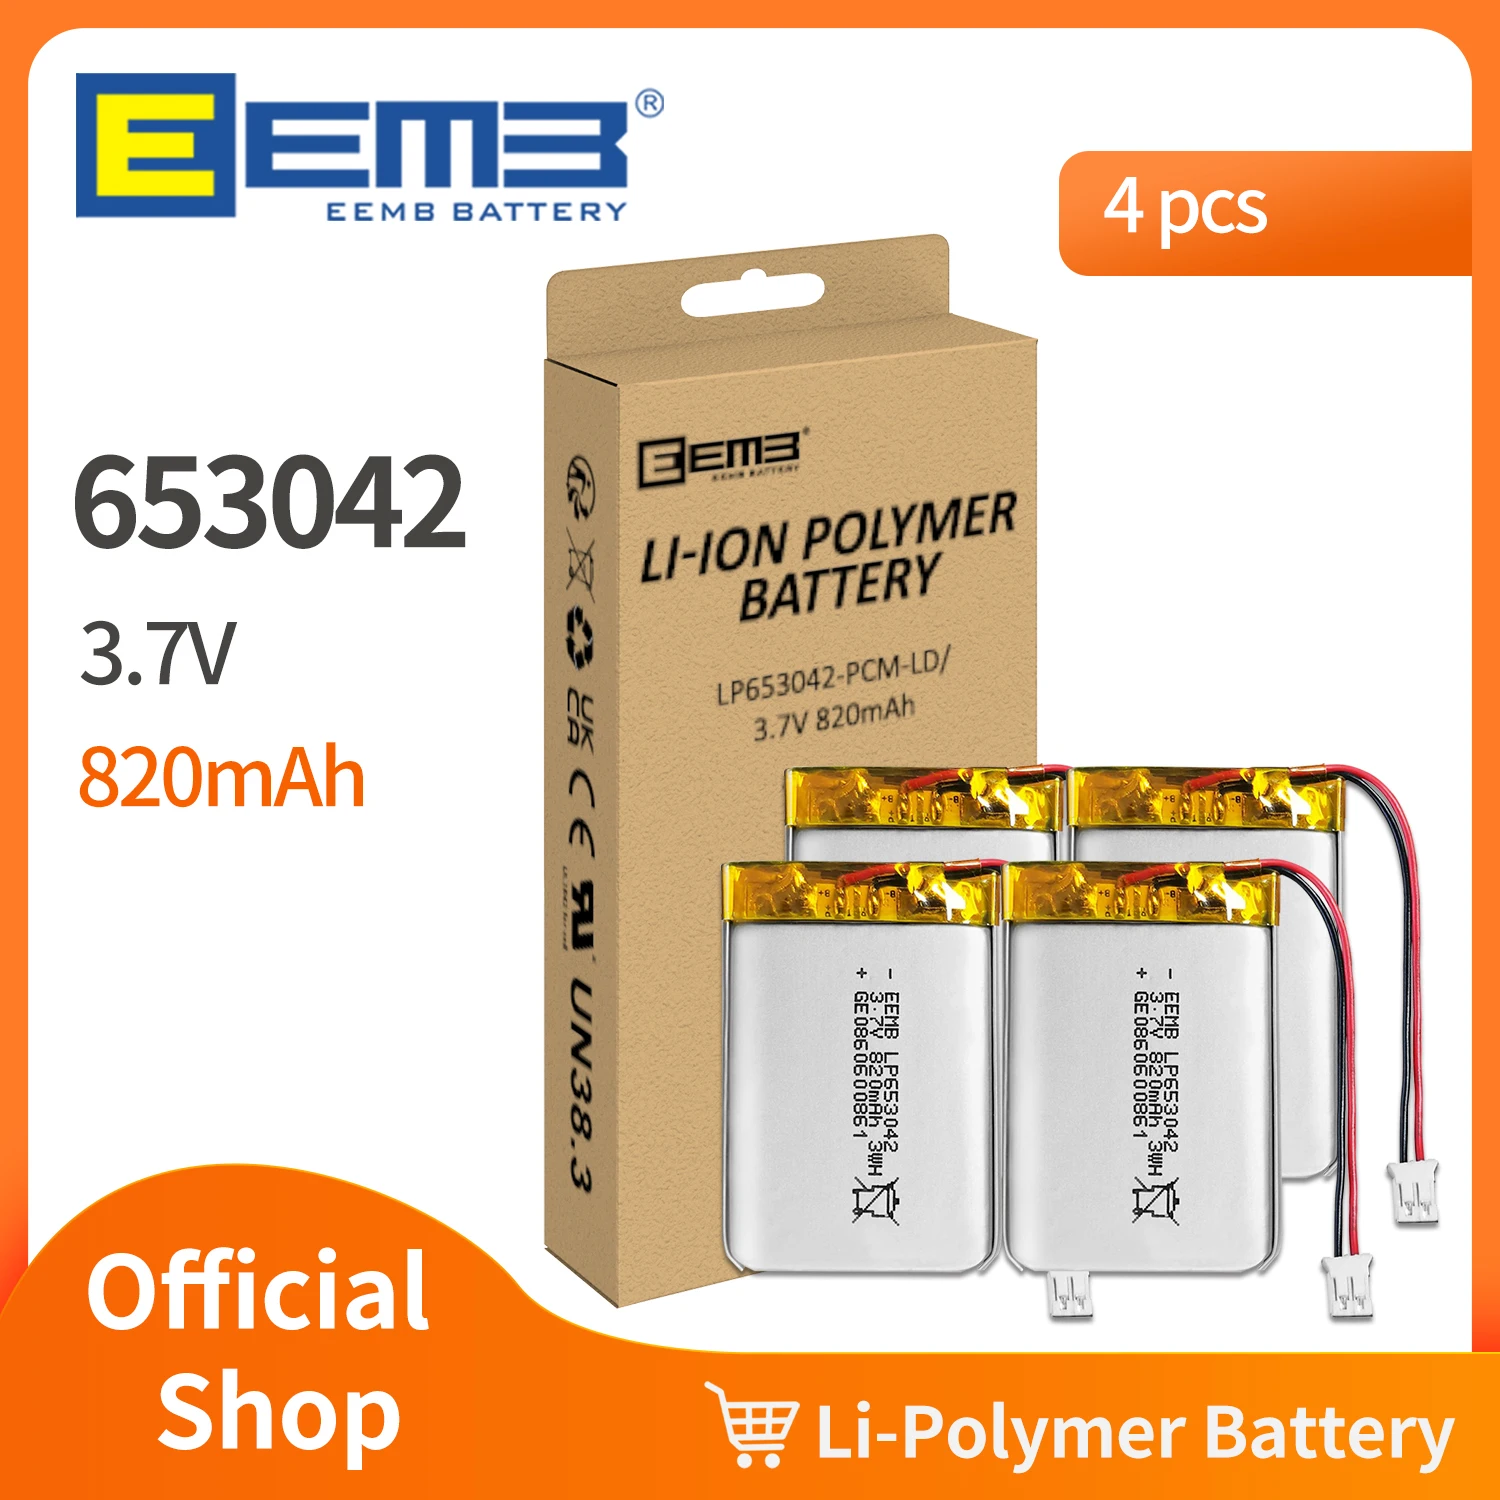 

EEMB 4PCS 3.7V Battery 800mAh 653042 Rechargeable Lithium-ion Polymer Battery Lipo Cell for Cameras Bluetooth Computers Doorbell